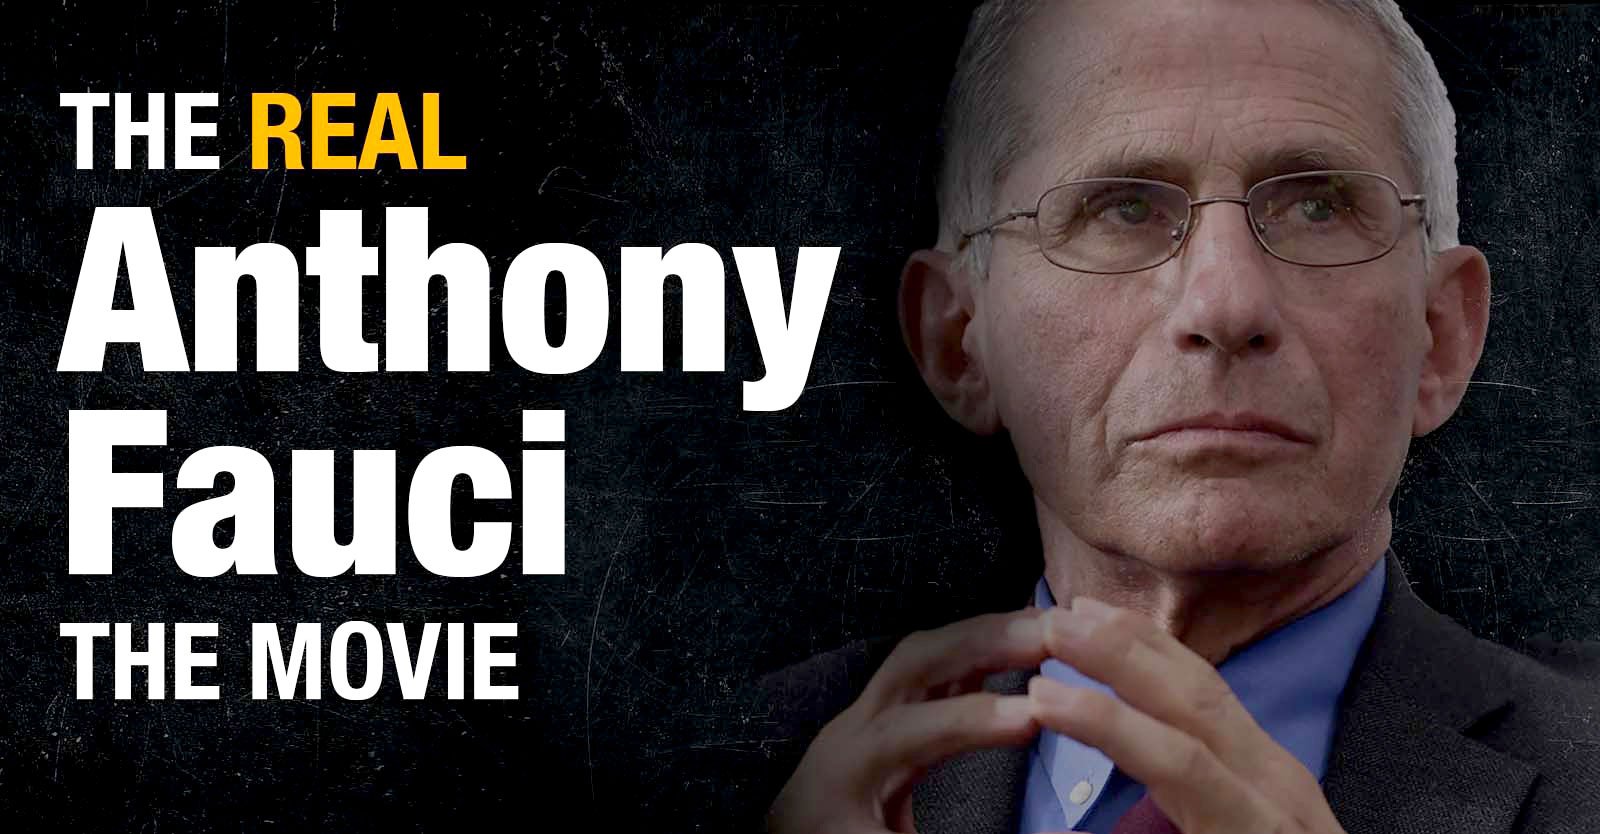 The Real Anthony Fauci The Movie